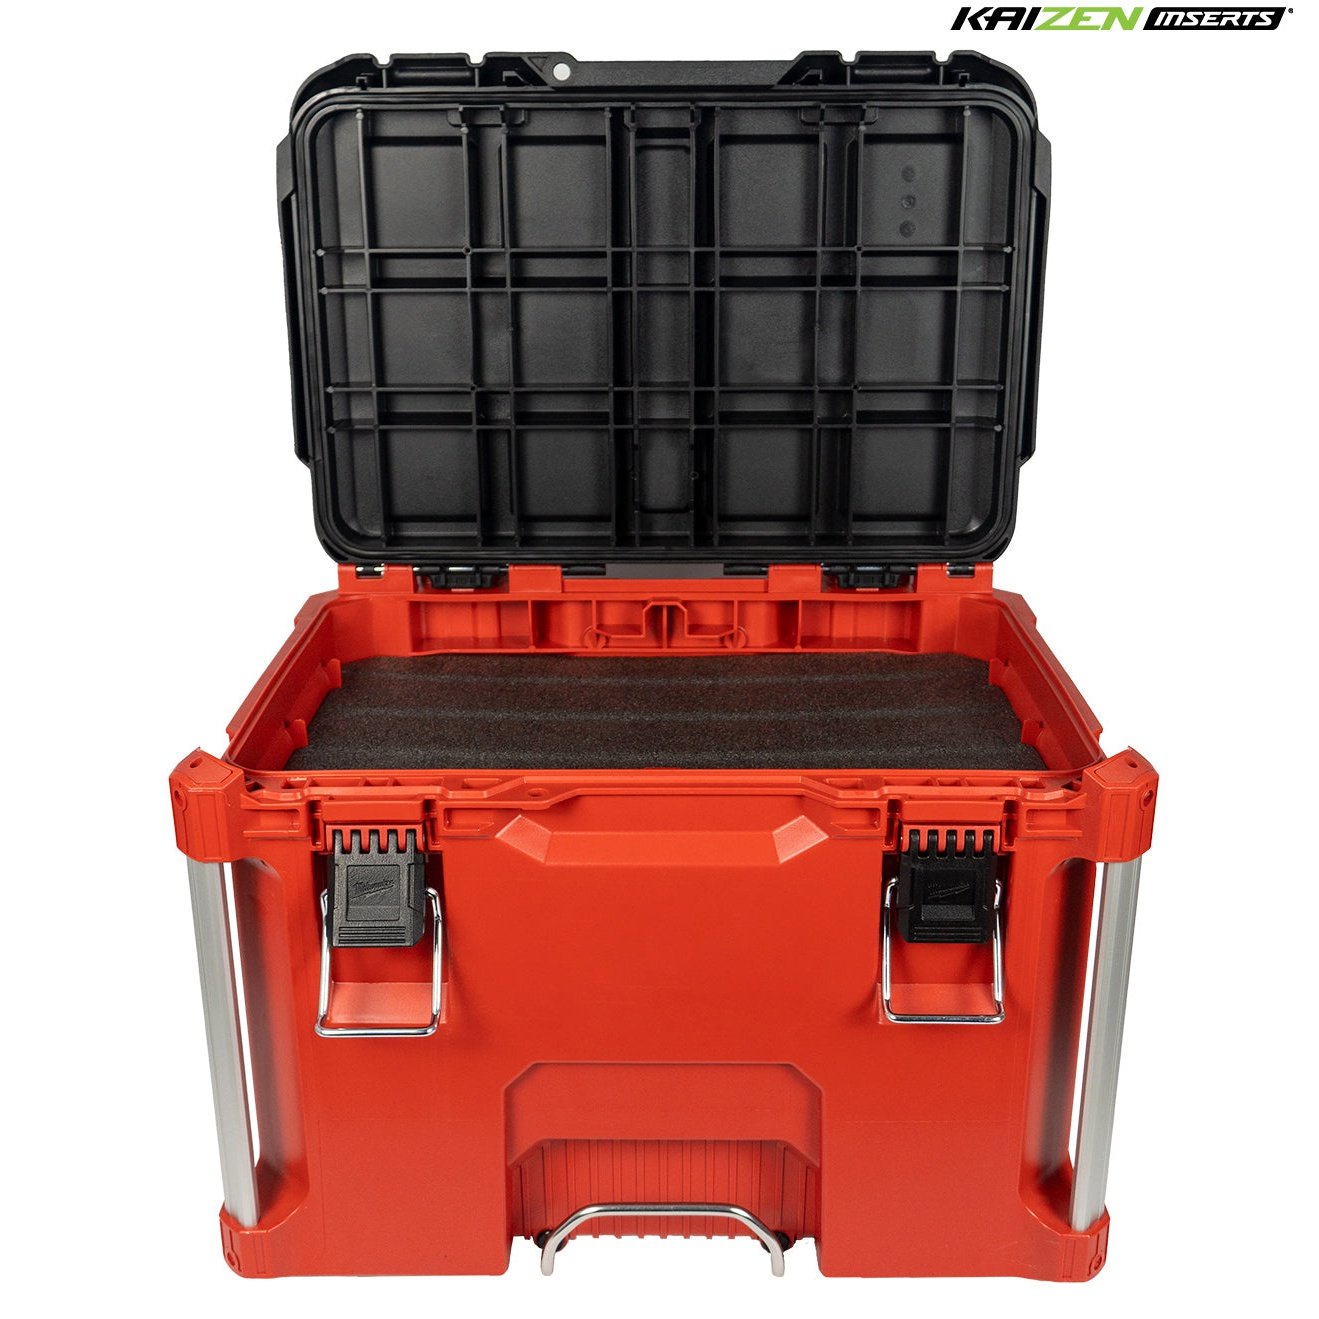 PACKOUT Rolling Tool Box, new 